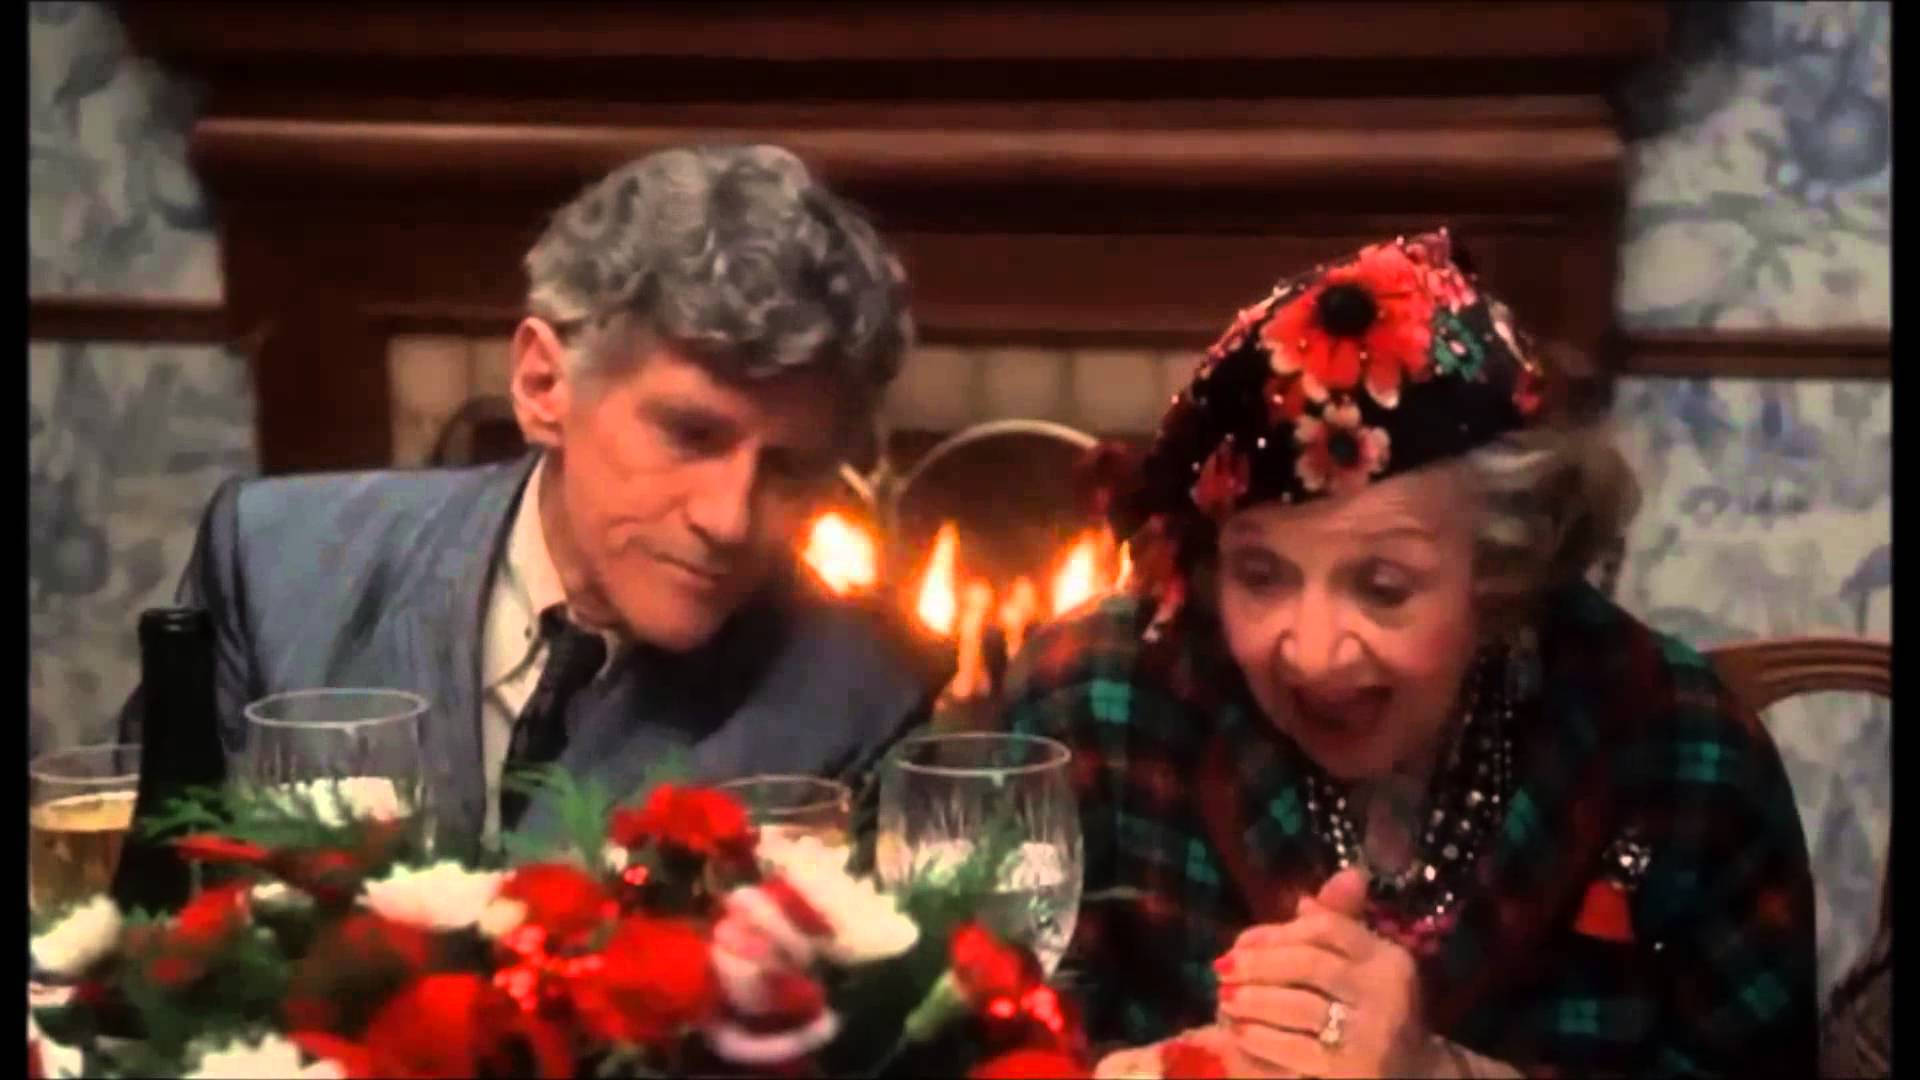 A Man And Woman Sitting At A Table With A Christmas Tree Wallpaper